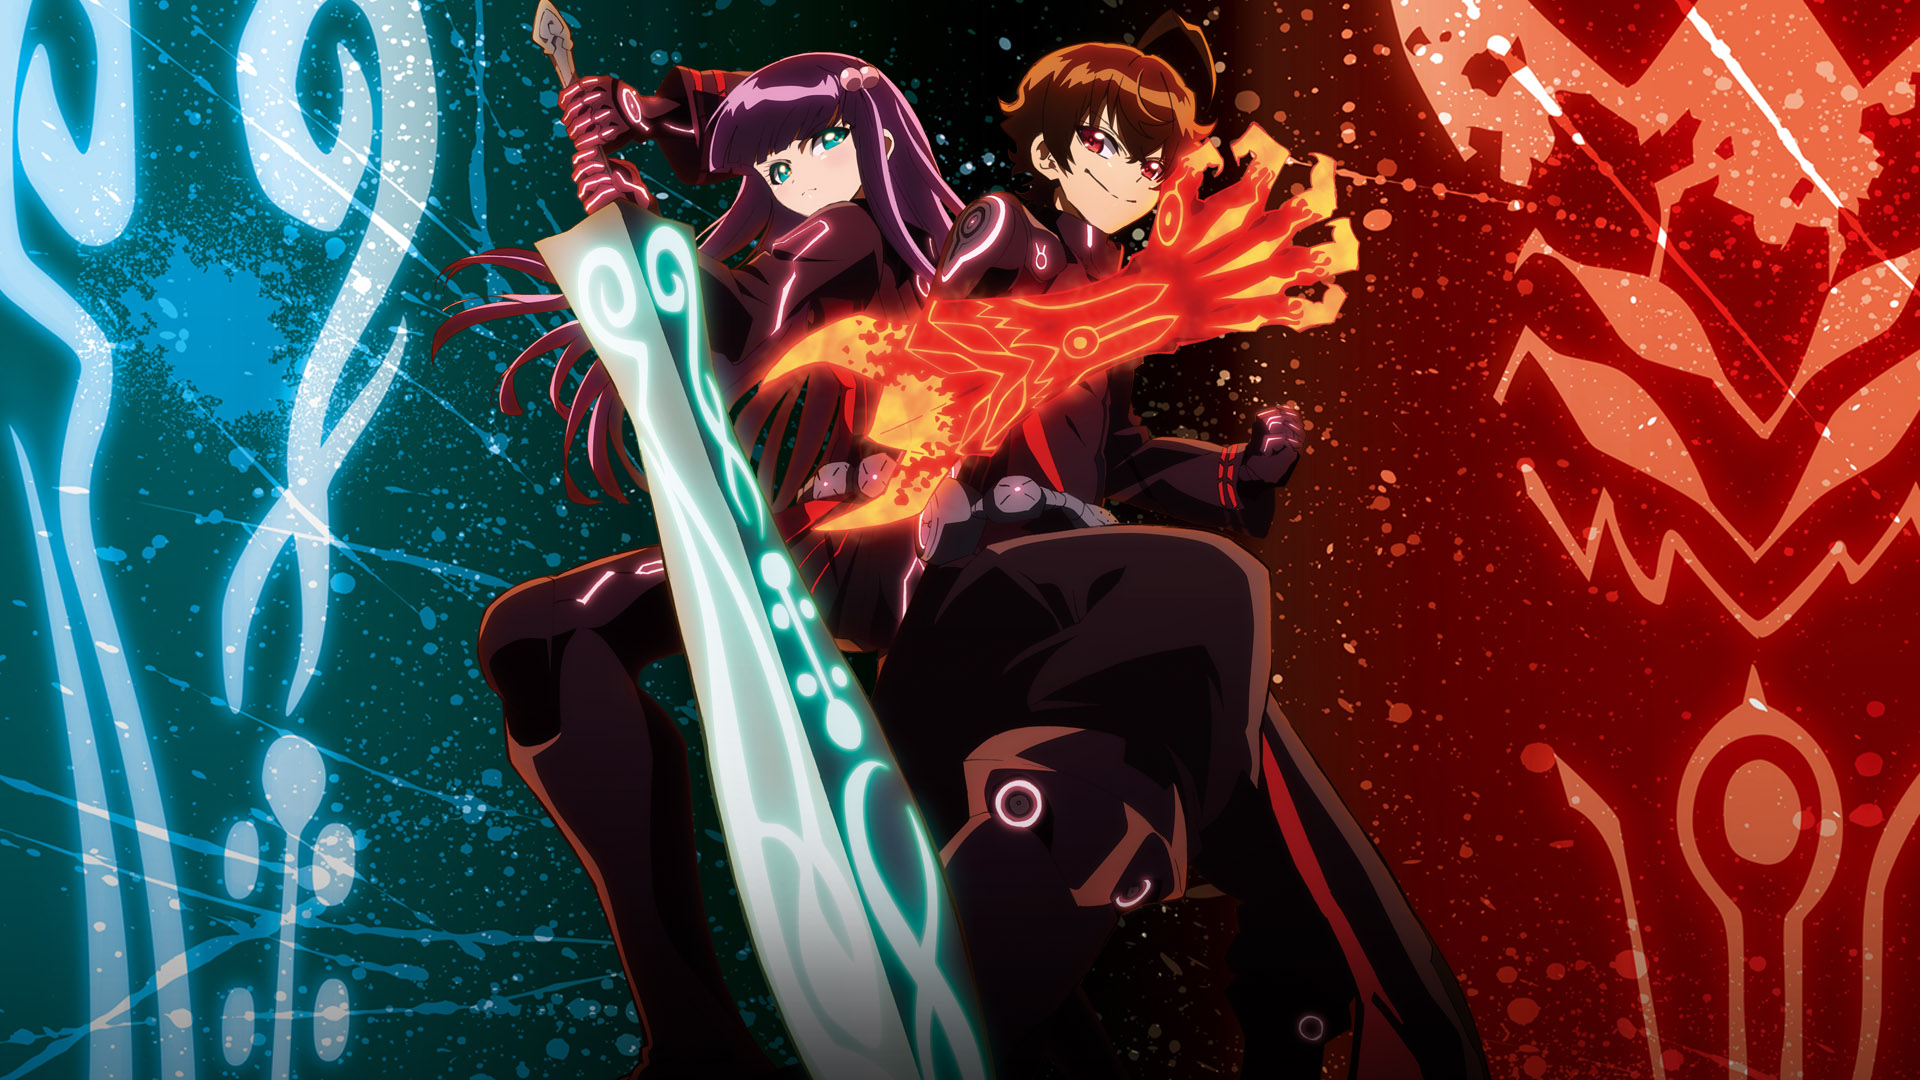 Twin Star Exorcists Images. 